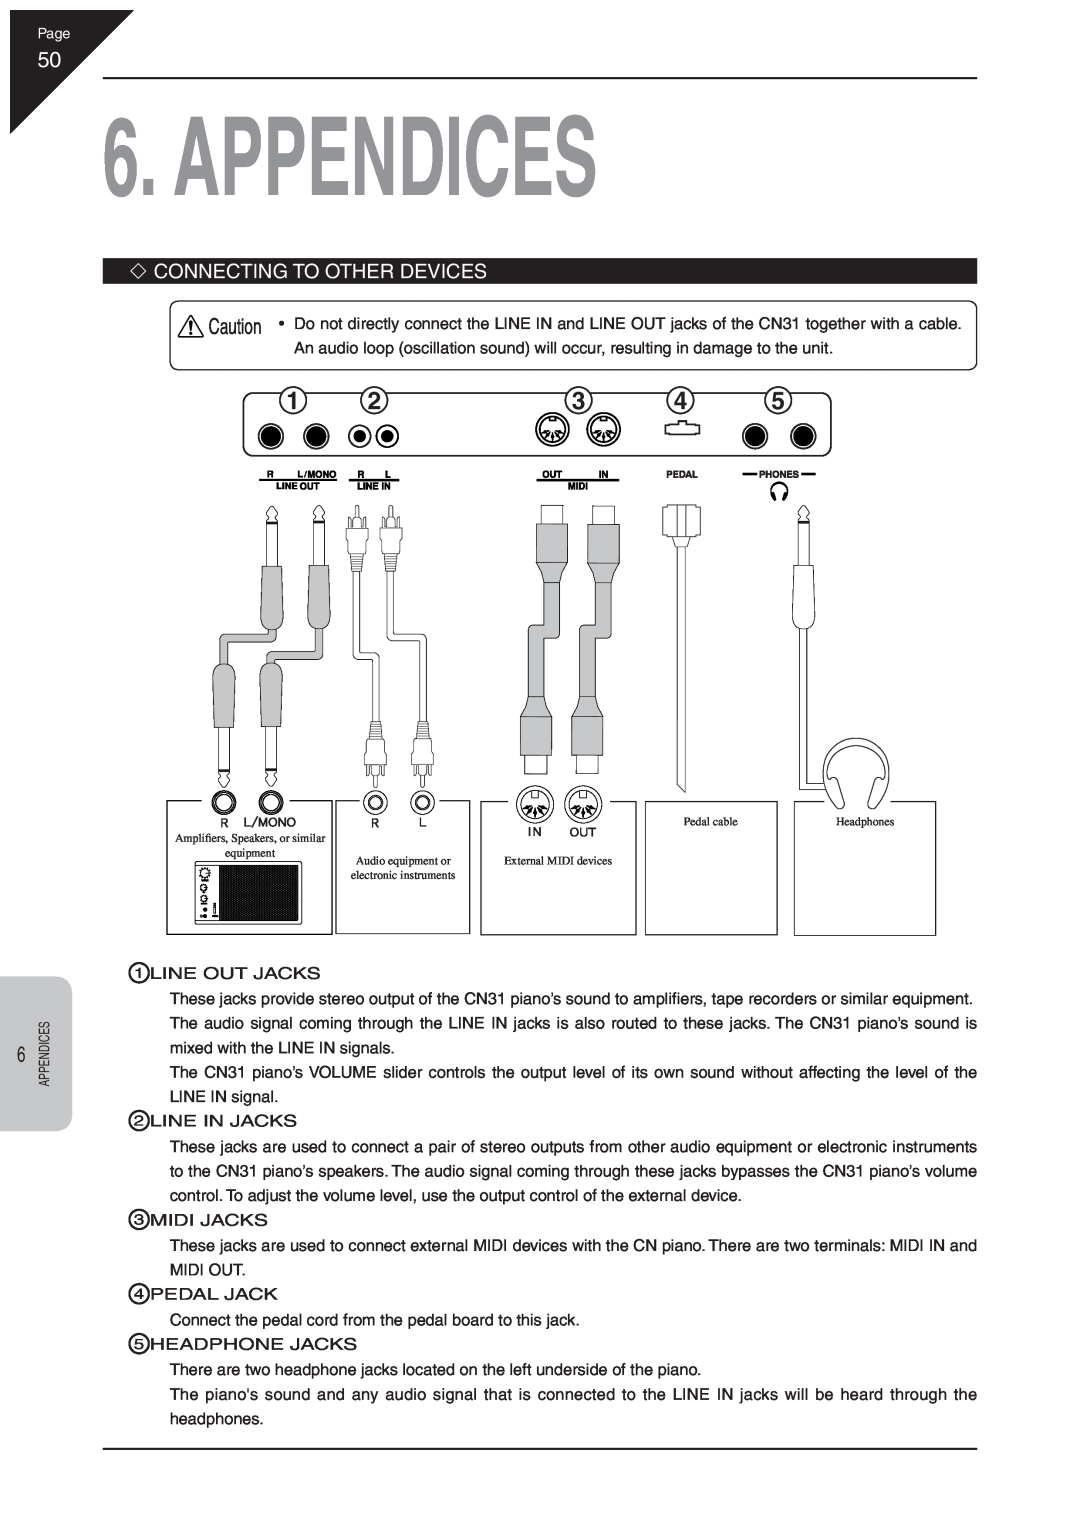 Kawai CN31 manual Appendices, ‘ Connecting To Other Devices 